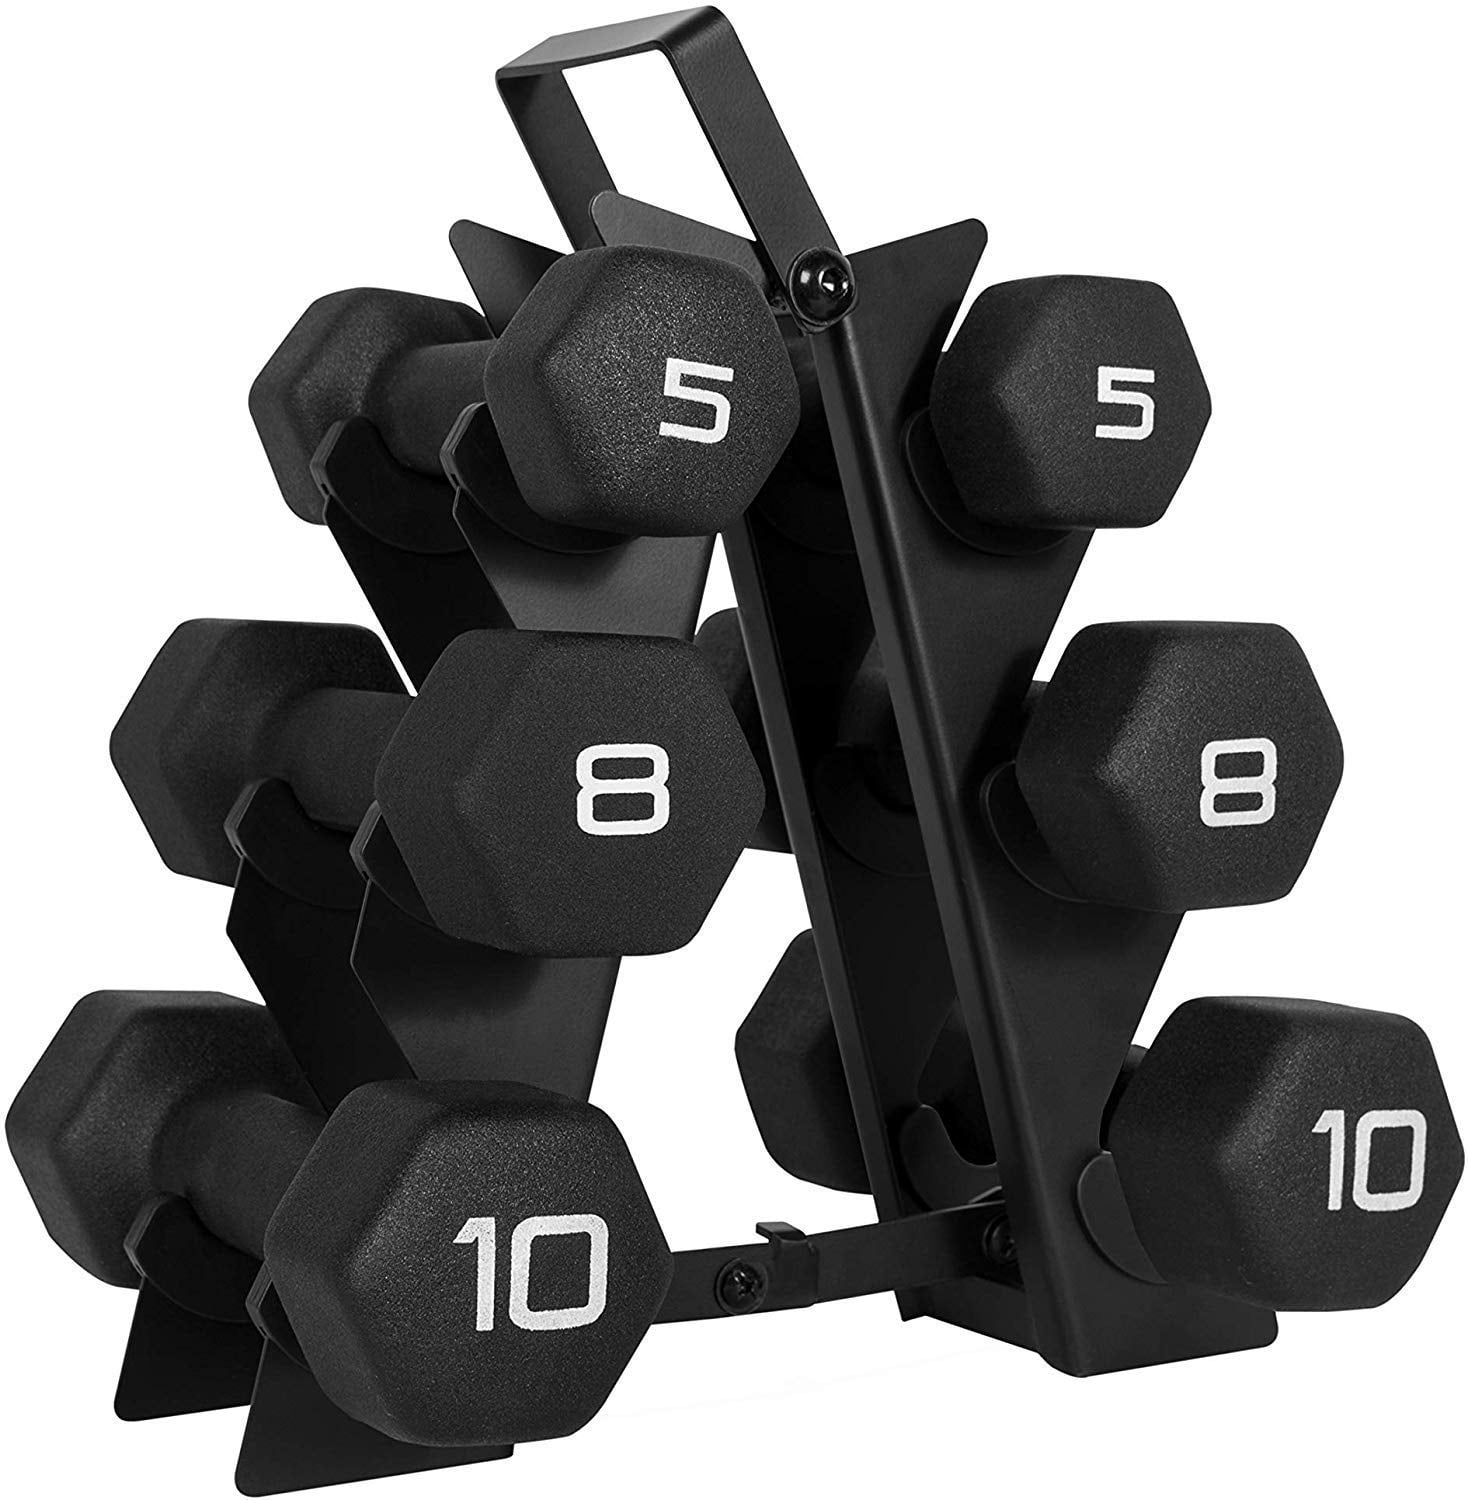 Non-Slip 12 LB Pair Hex Shape Weight Loss Sold in pairs Perfect for Home Use and Small Personal Training Studio Strength Building BLACK Neoprene Dumbbell Free weights set for Muscle Toning